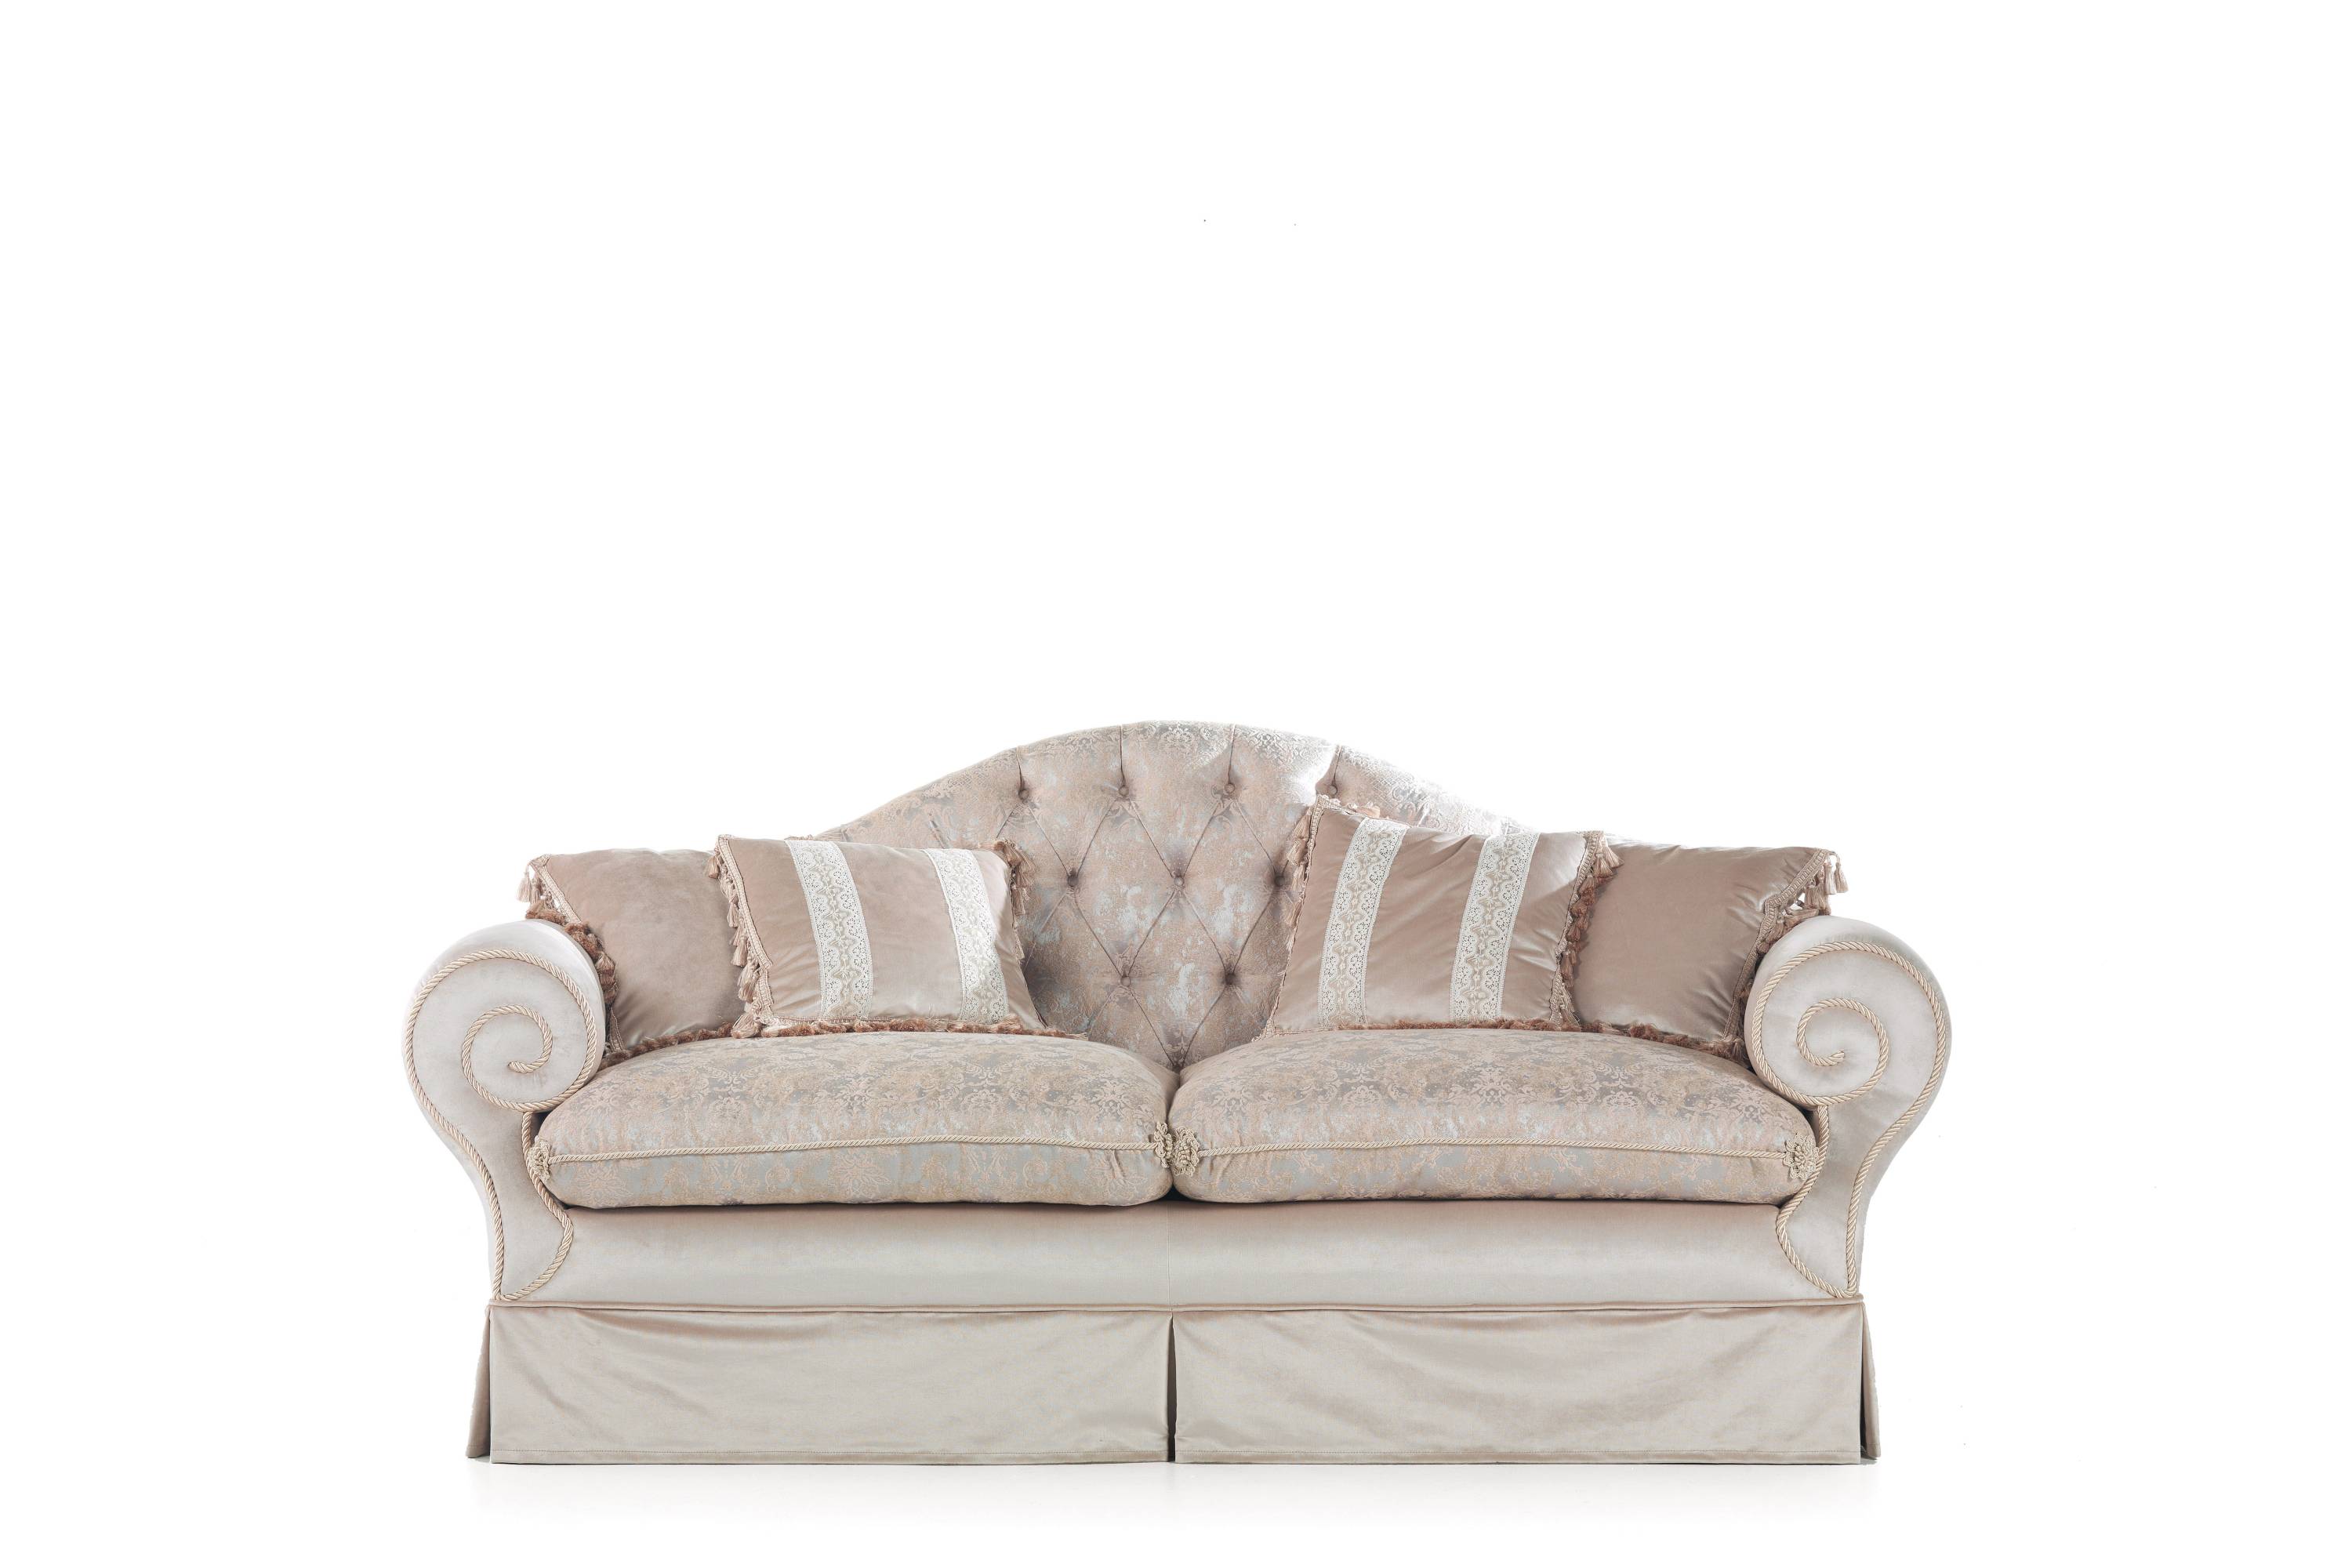 SCARLETT 2-seater sofa - 3-seater sofa - Bespoke projects with luxury Made in Italy classic furniture